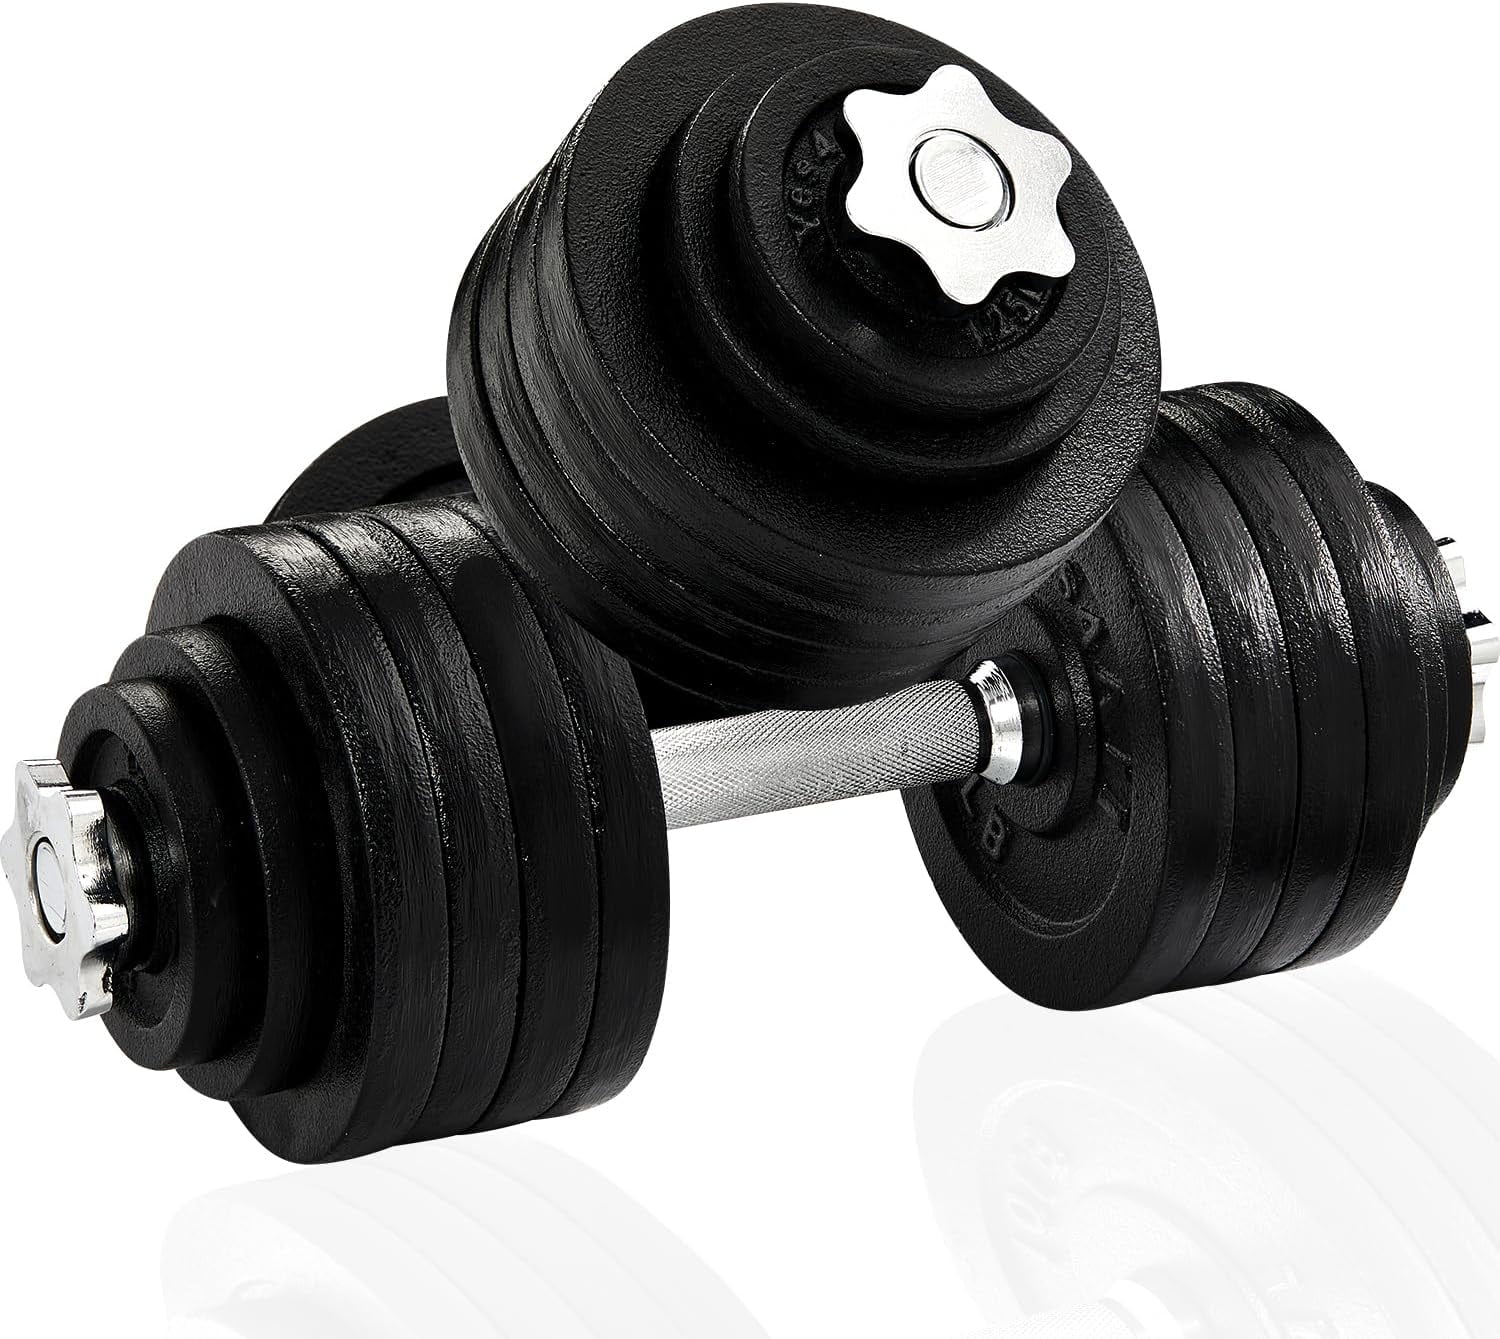 Adjustable Weight Dumbbells Set- A Pair 4lb 6lb 8lb 10lb (2-5lb Each) Free  Weights Set for Home Gym Equipment Workouts Strength Training for Women